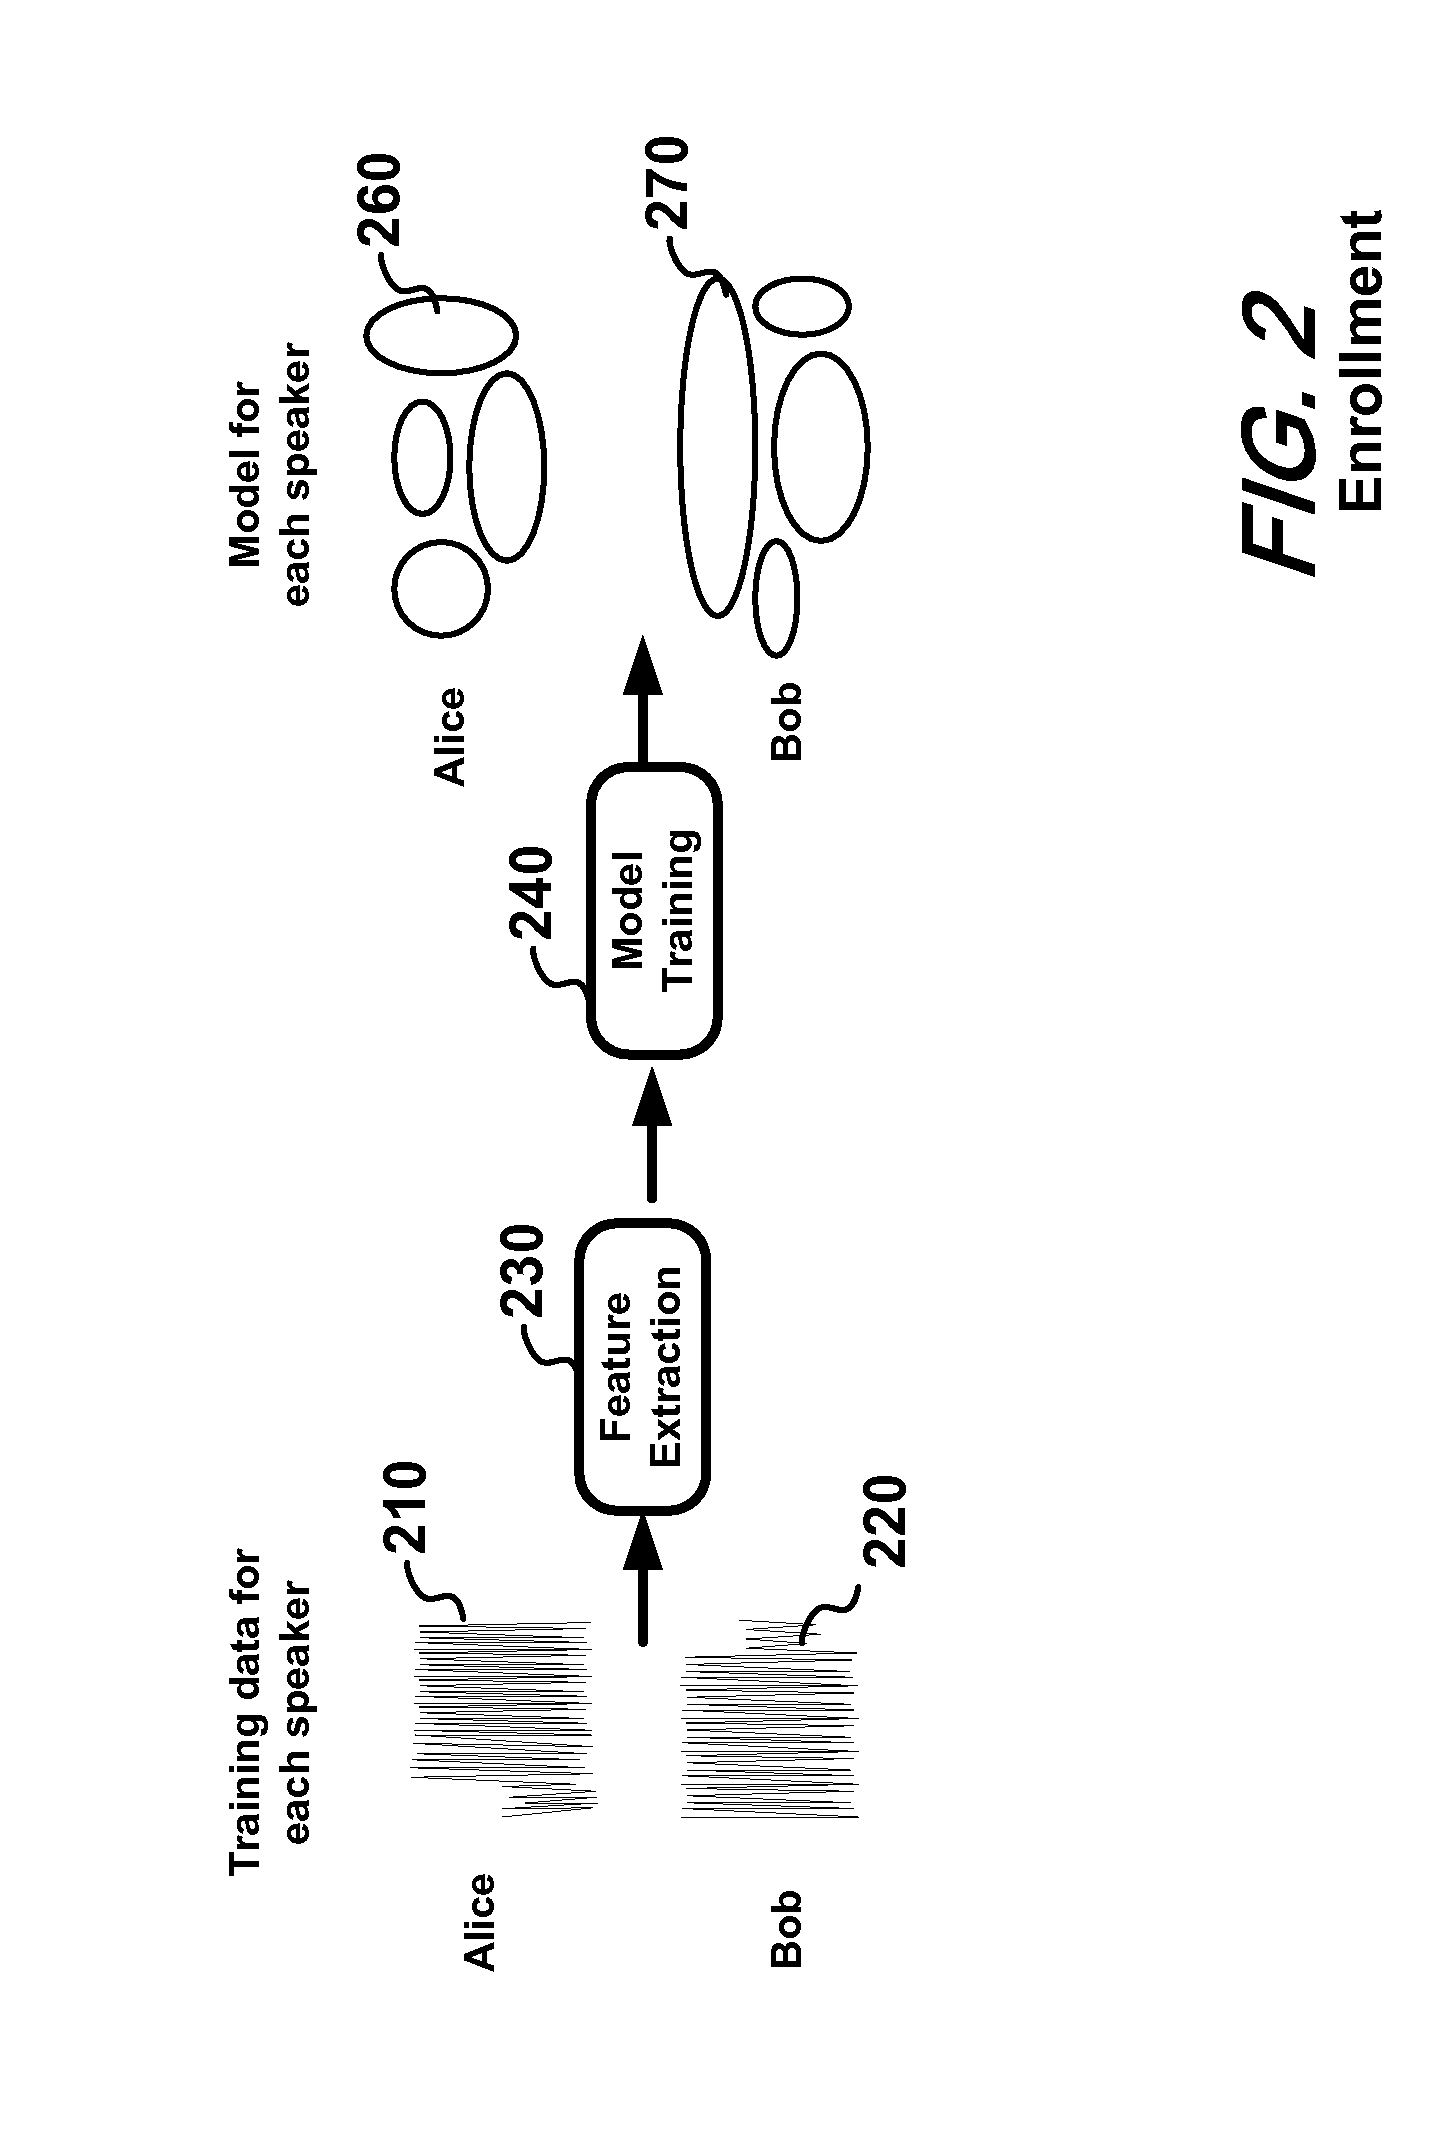 Voice-based multimodal speaker authentication using adaptive training and applications thereof